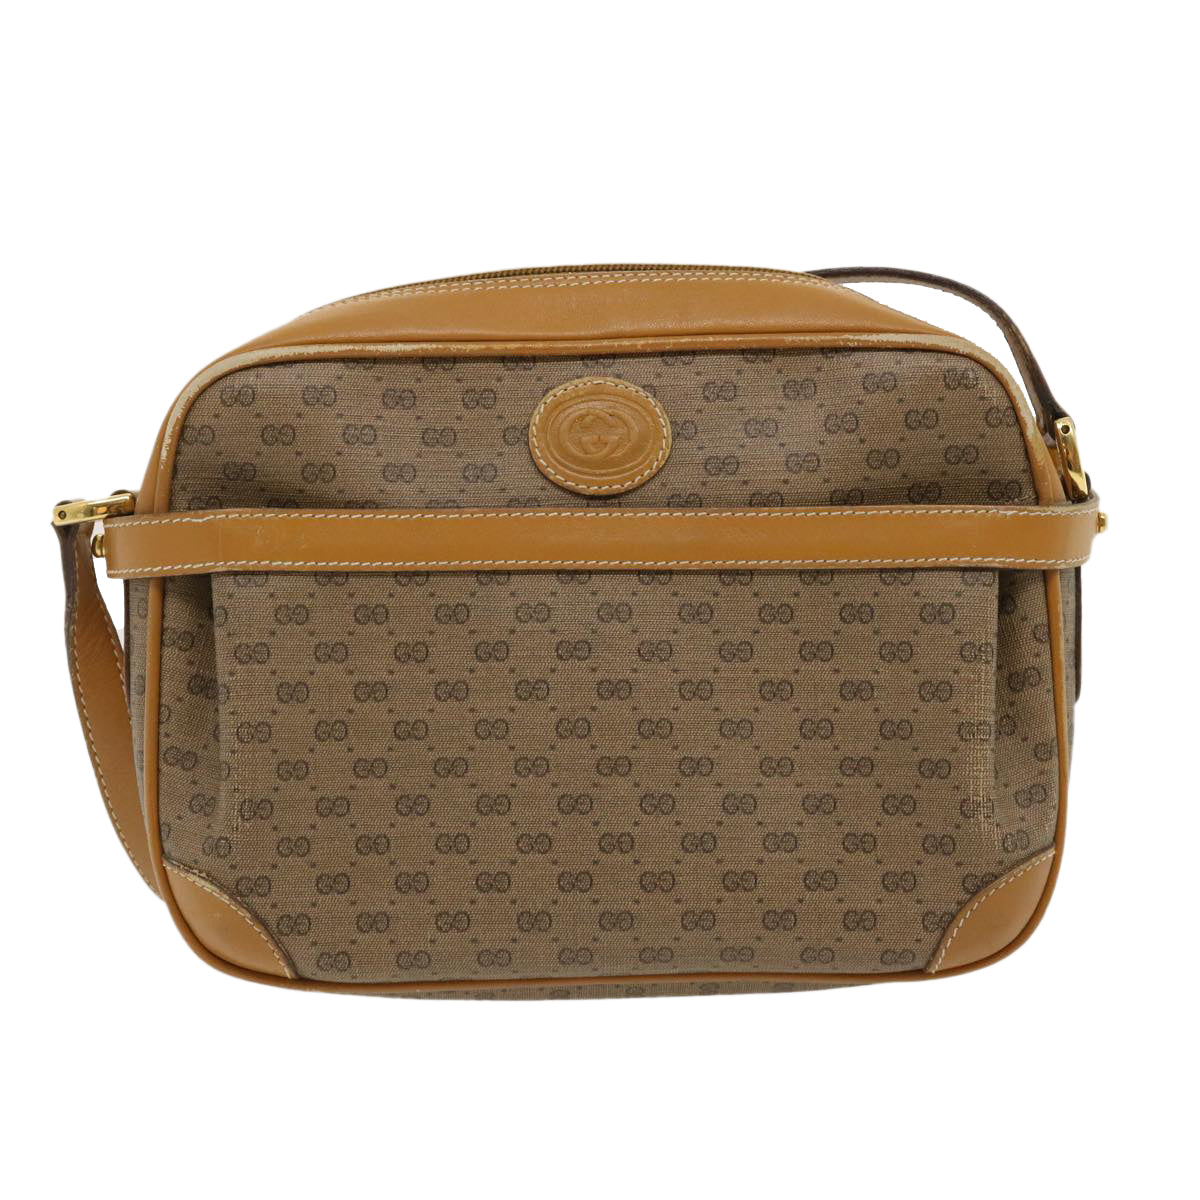 GUCCI Micro GG Canvas Shoulder Bag PVC Leather Beige Brown Auth th2698